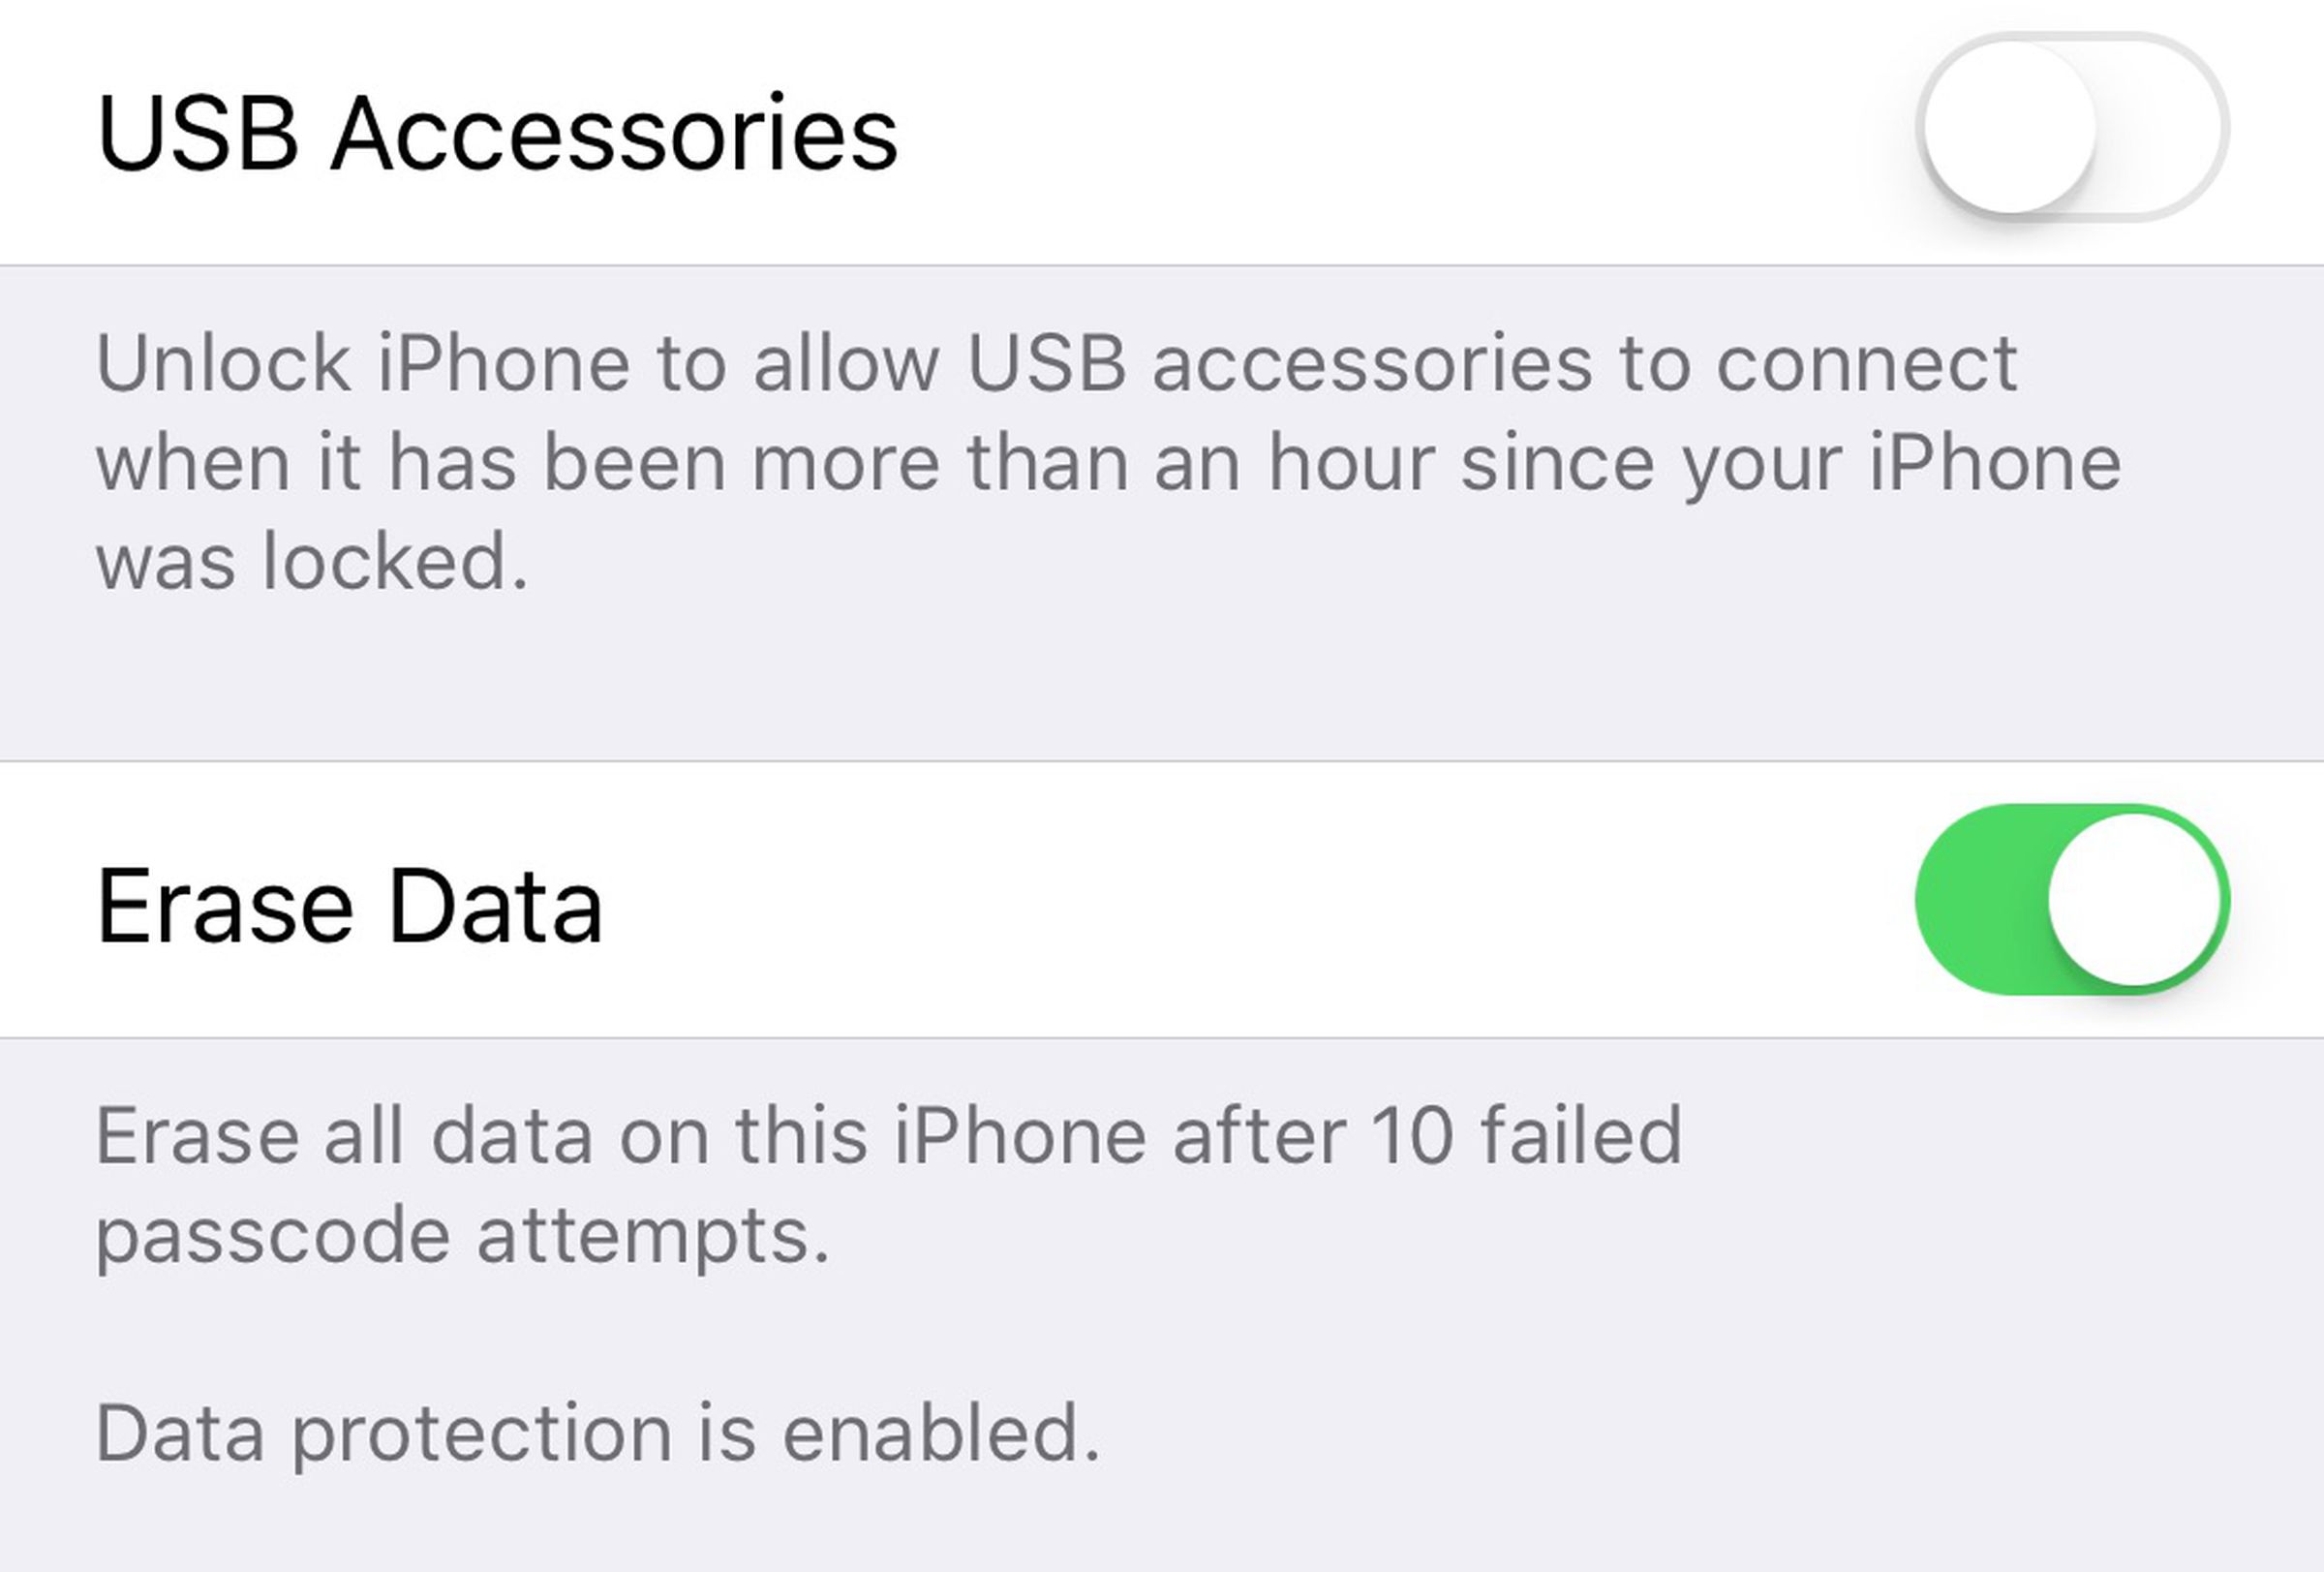 USB Restricted Mode is active when the “USB Accessories” toggle is disabled / on the left.